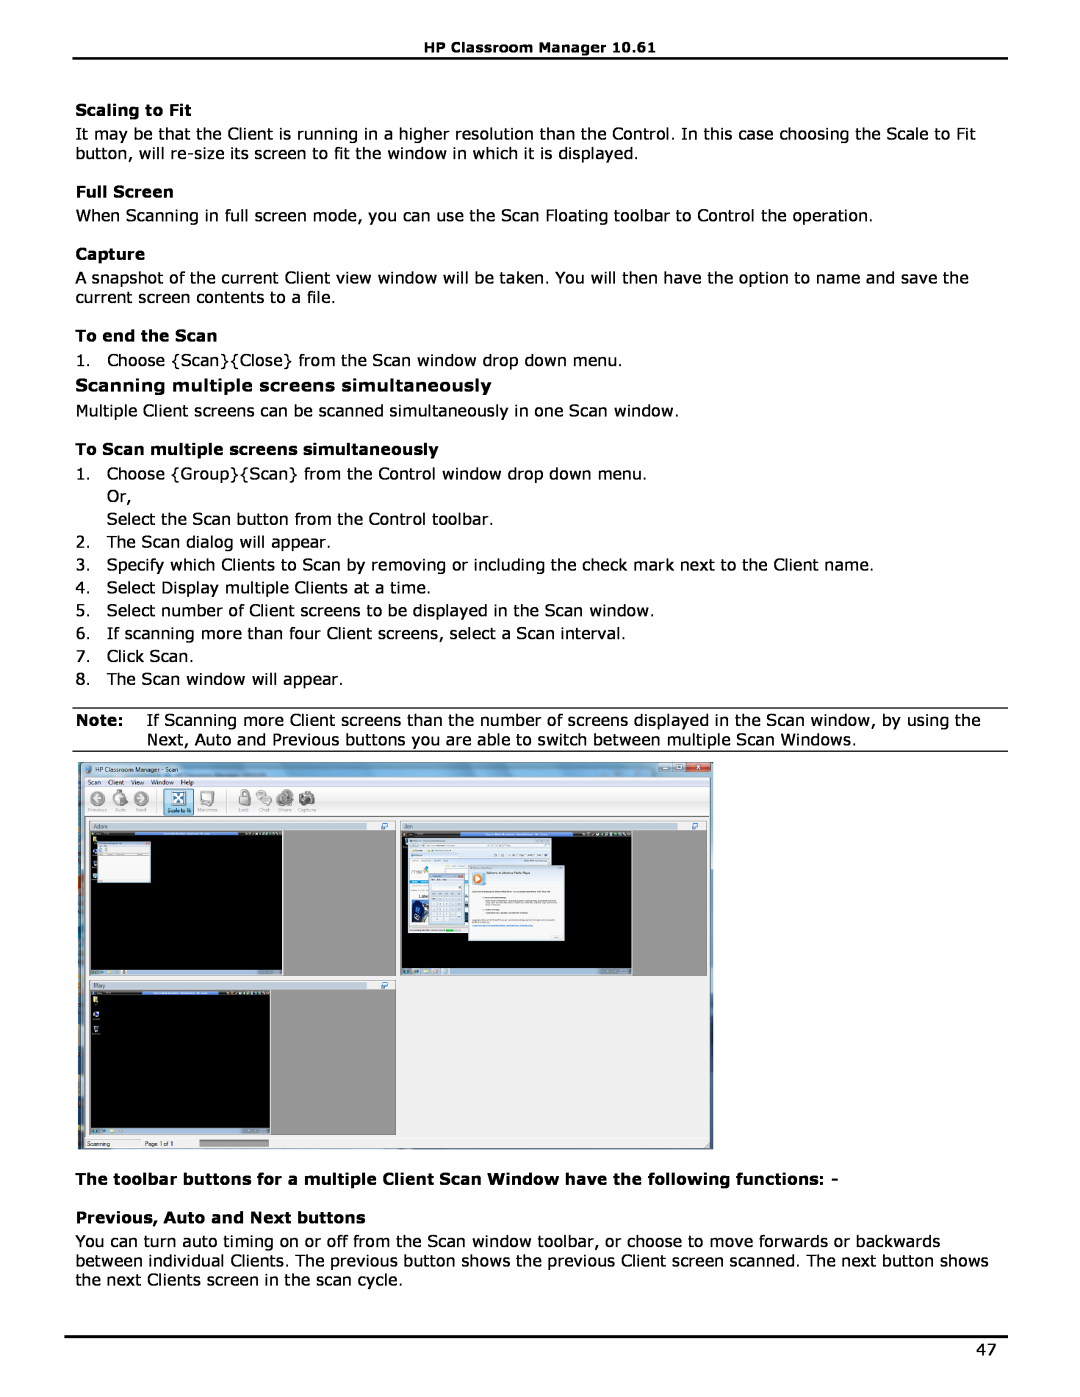 HP Classroom Manager manual Scanning multiple screens simultaneously, Scaling to Fit, Full Screen, Capture, To end the Scan 